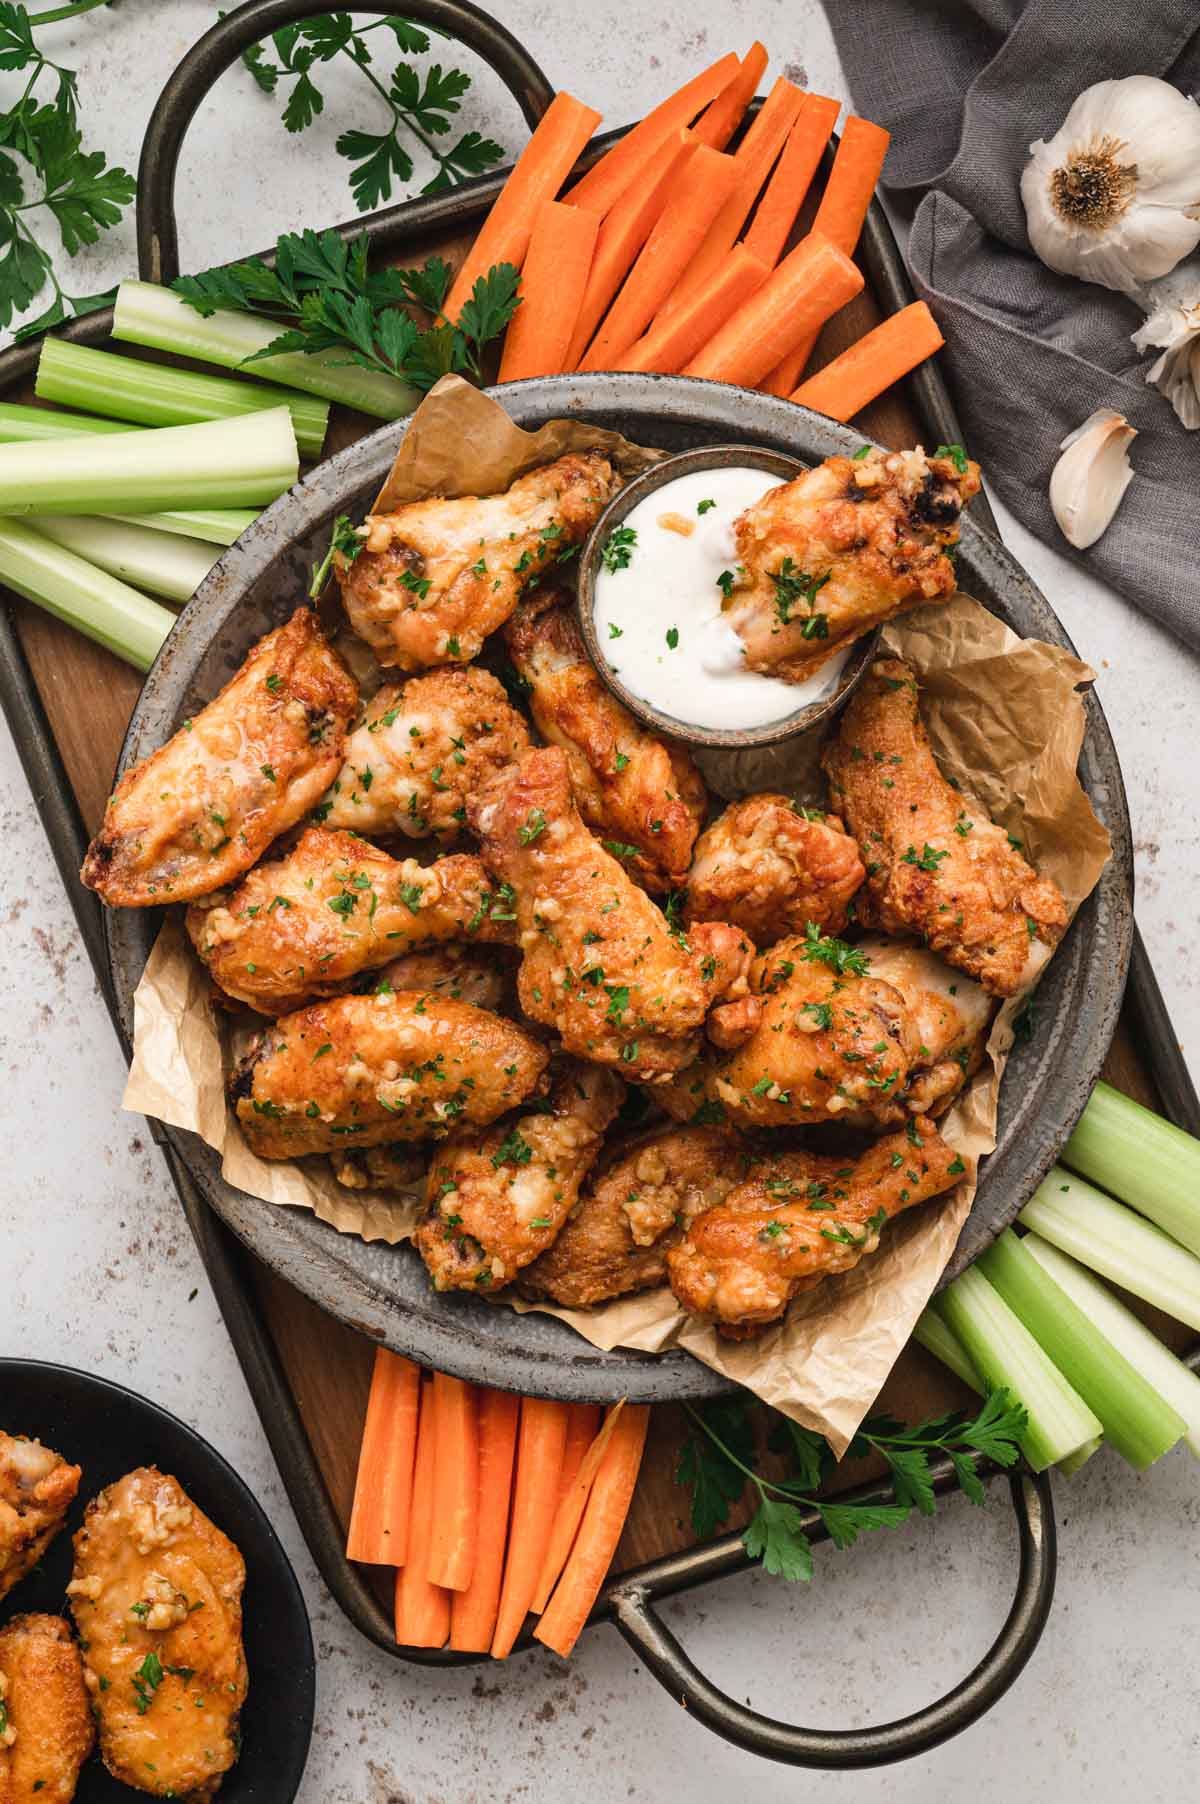 Chicken wings, on a silver tray with large handles, surrounded by celery and carrot sticks.